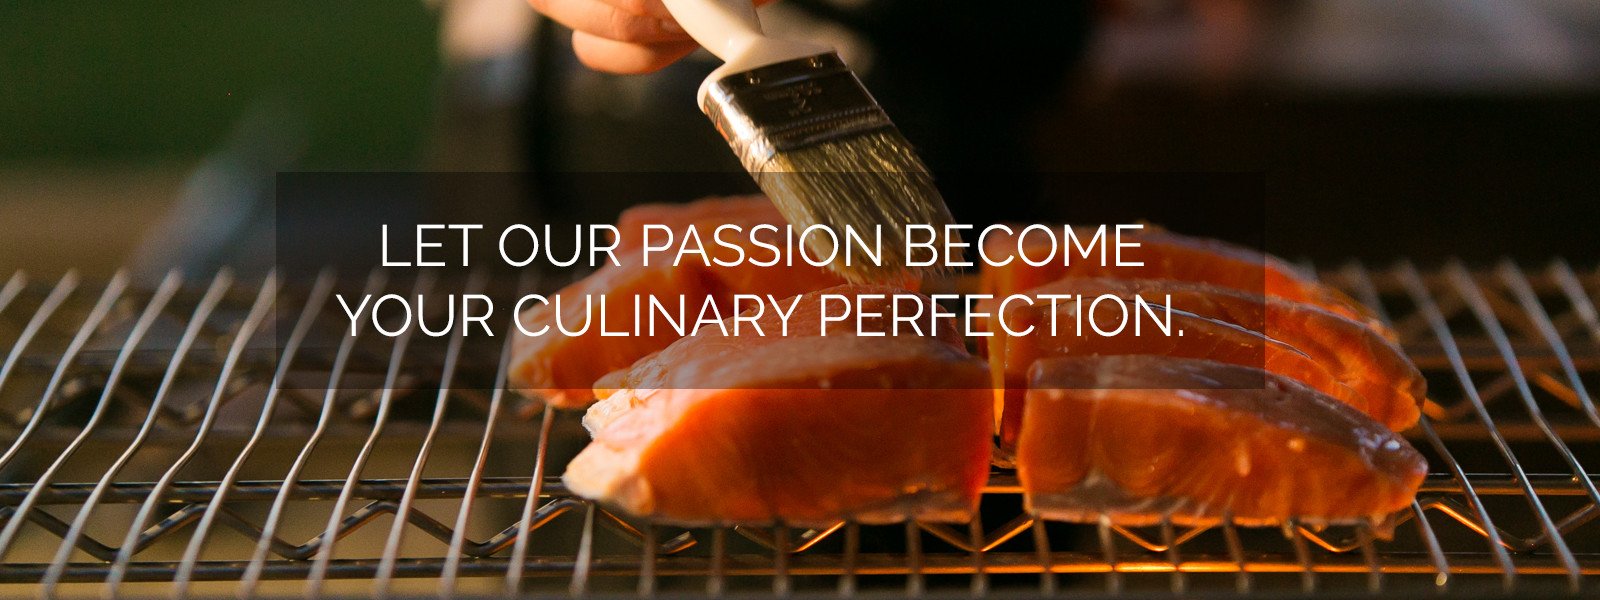 Let our passion become your culinary perfection.